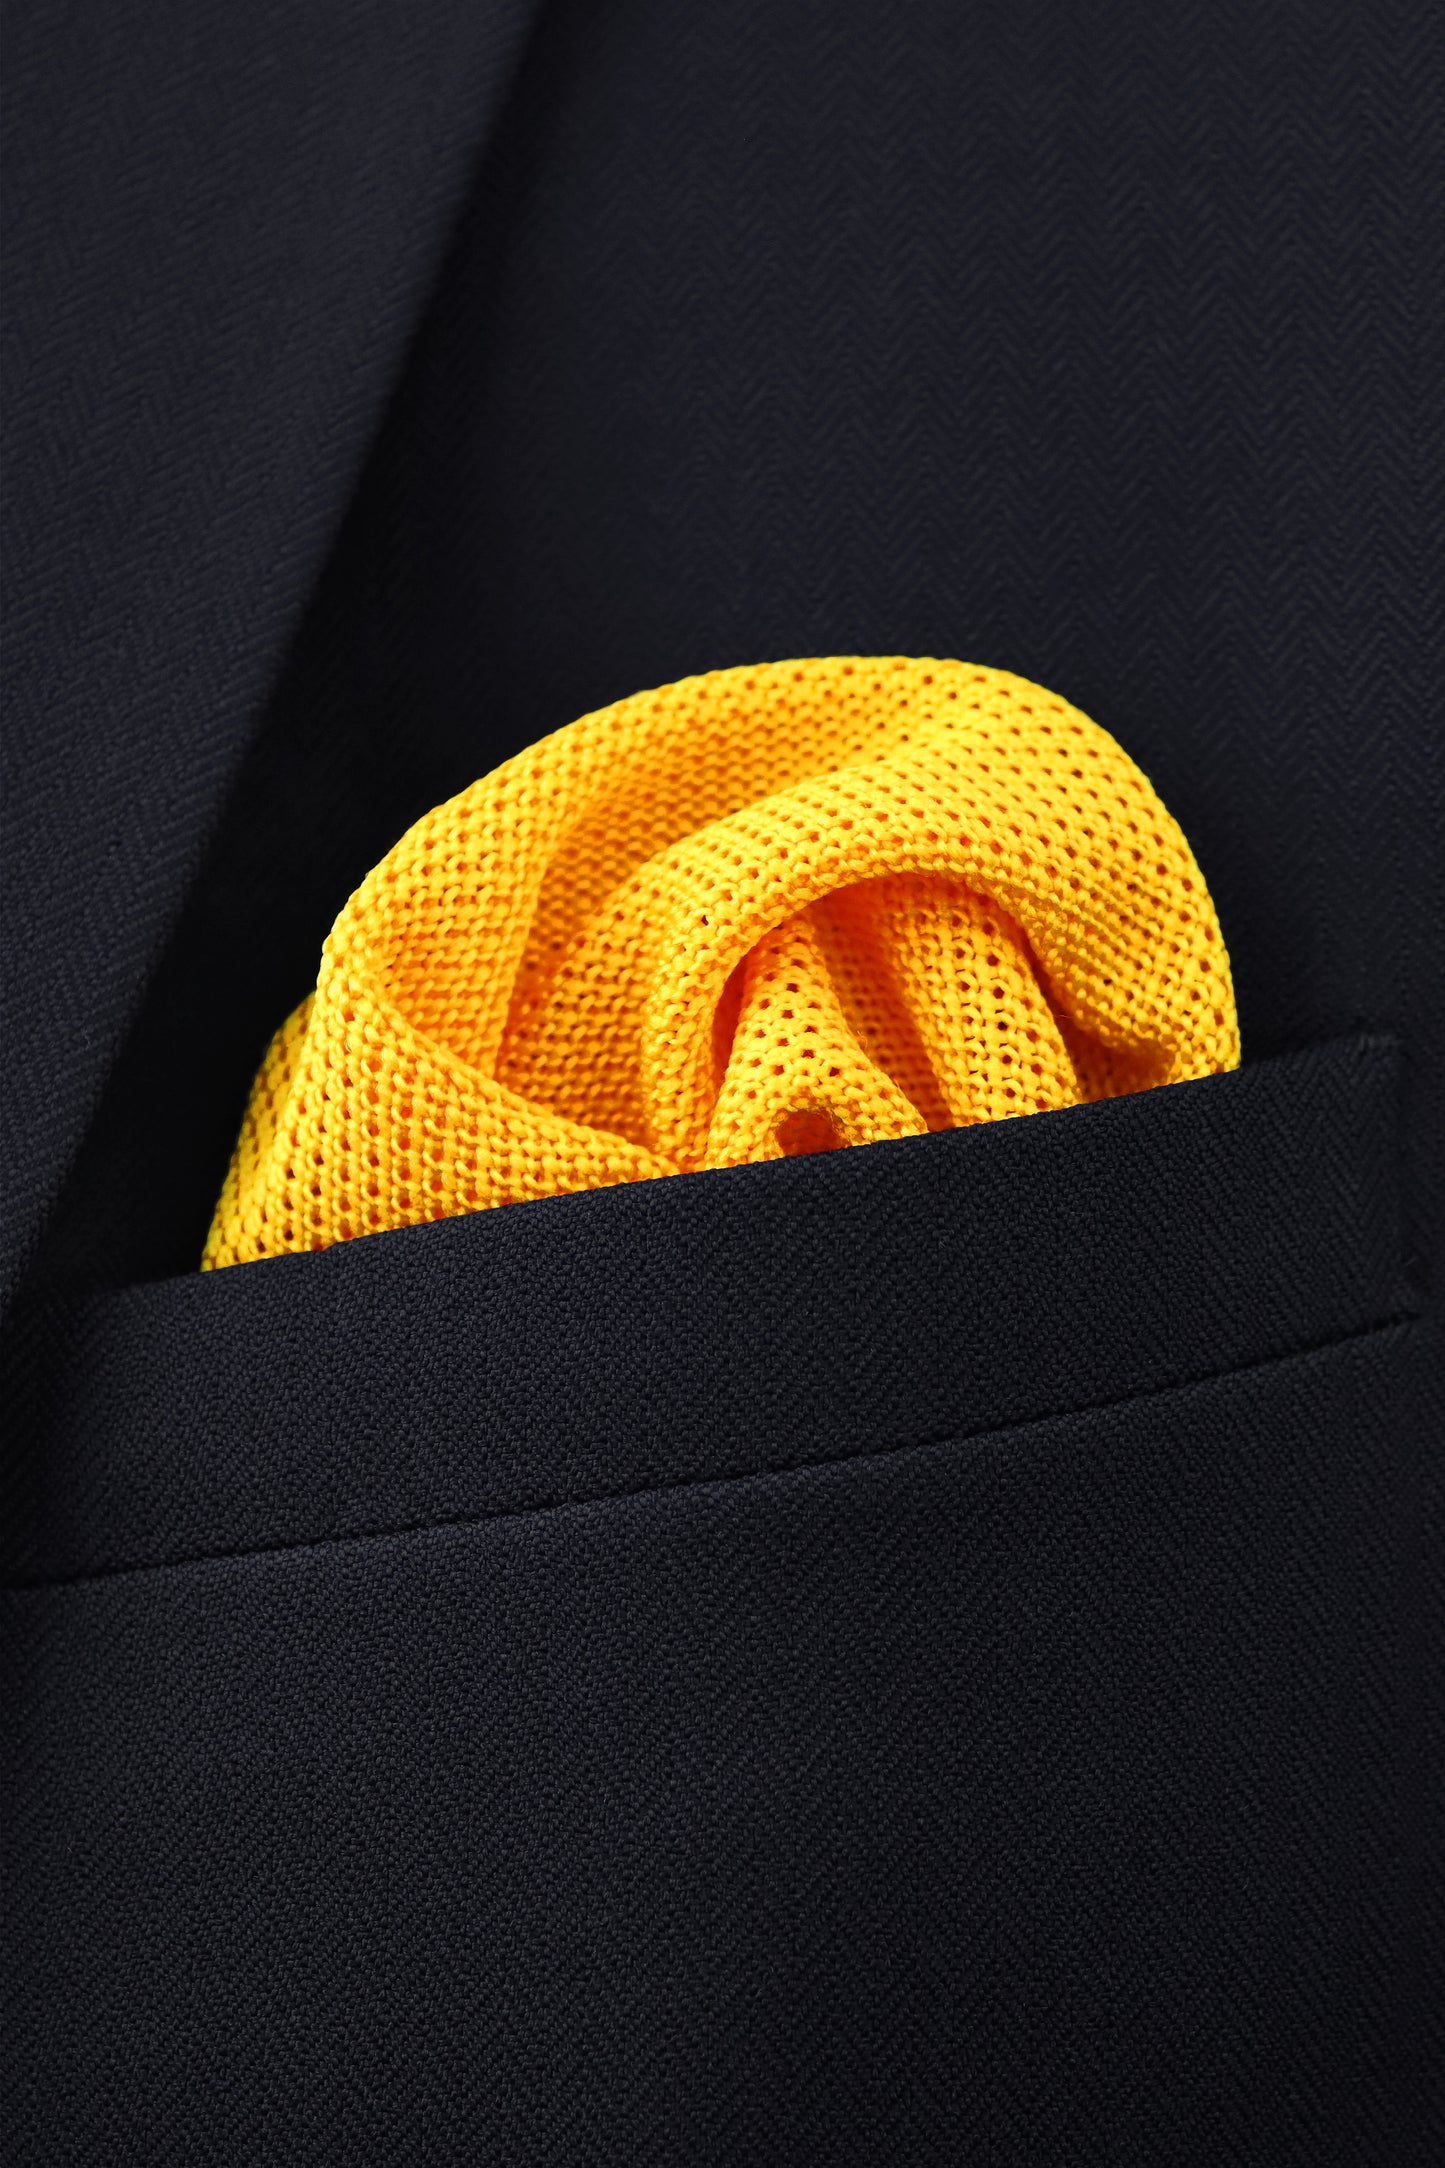 100% Polyester Square End Knitted Tie - Mustard Yellow